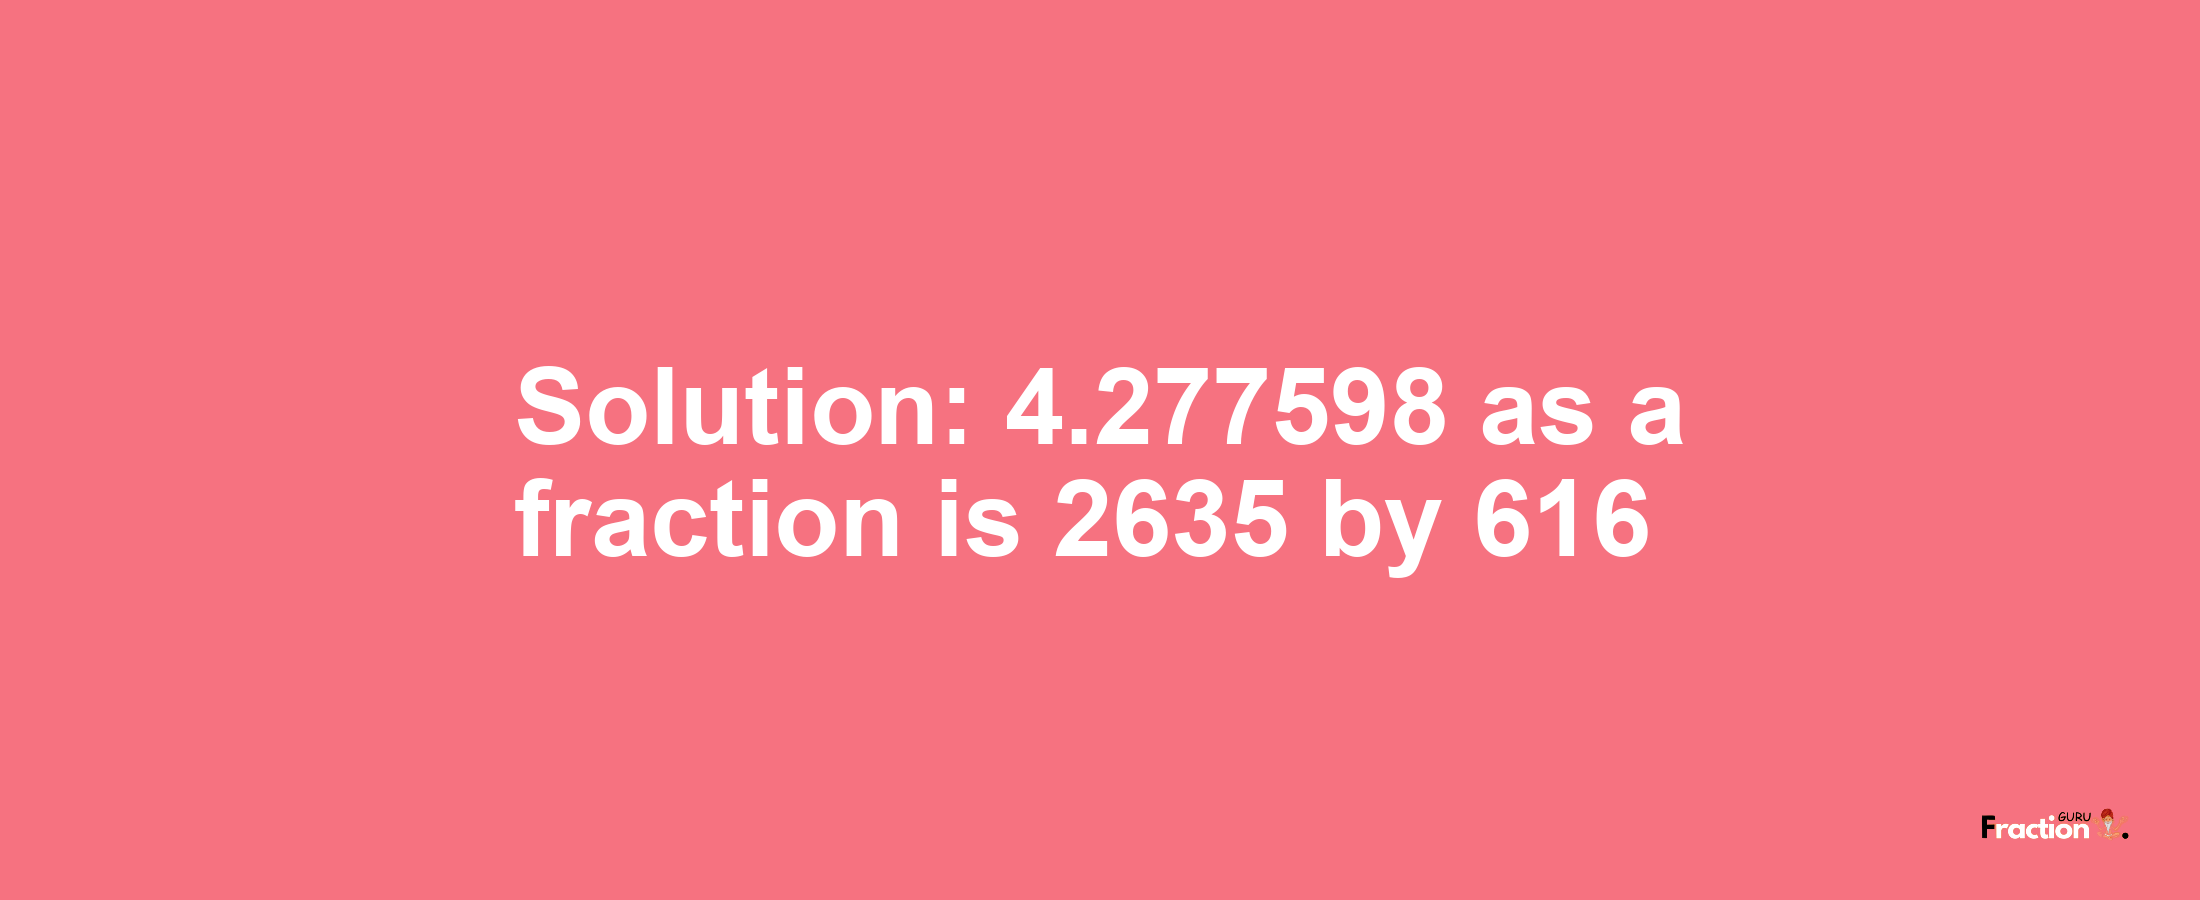 Solution:4.277598 as a fraction is 2635/616